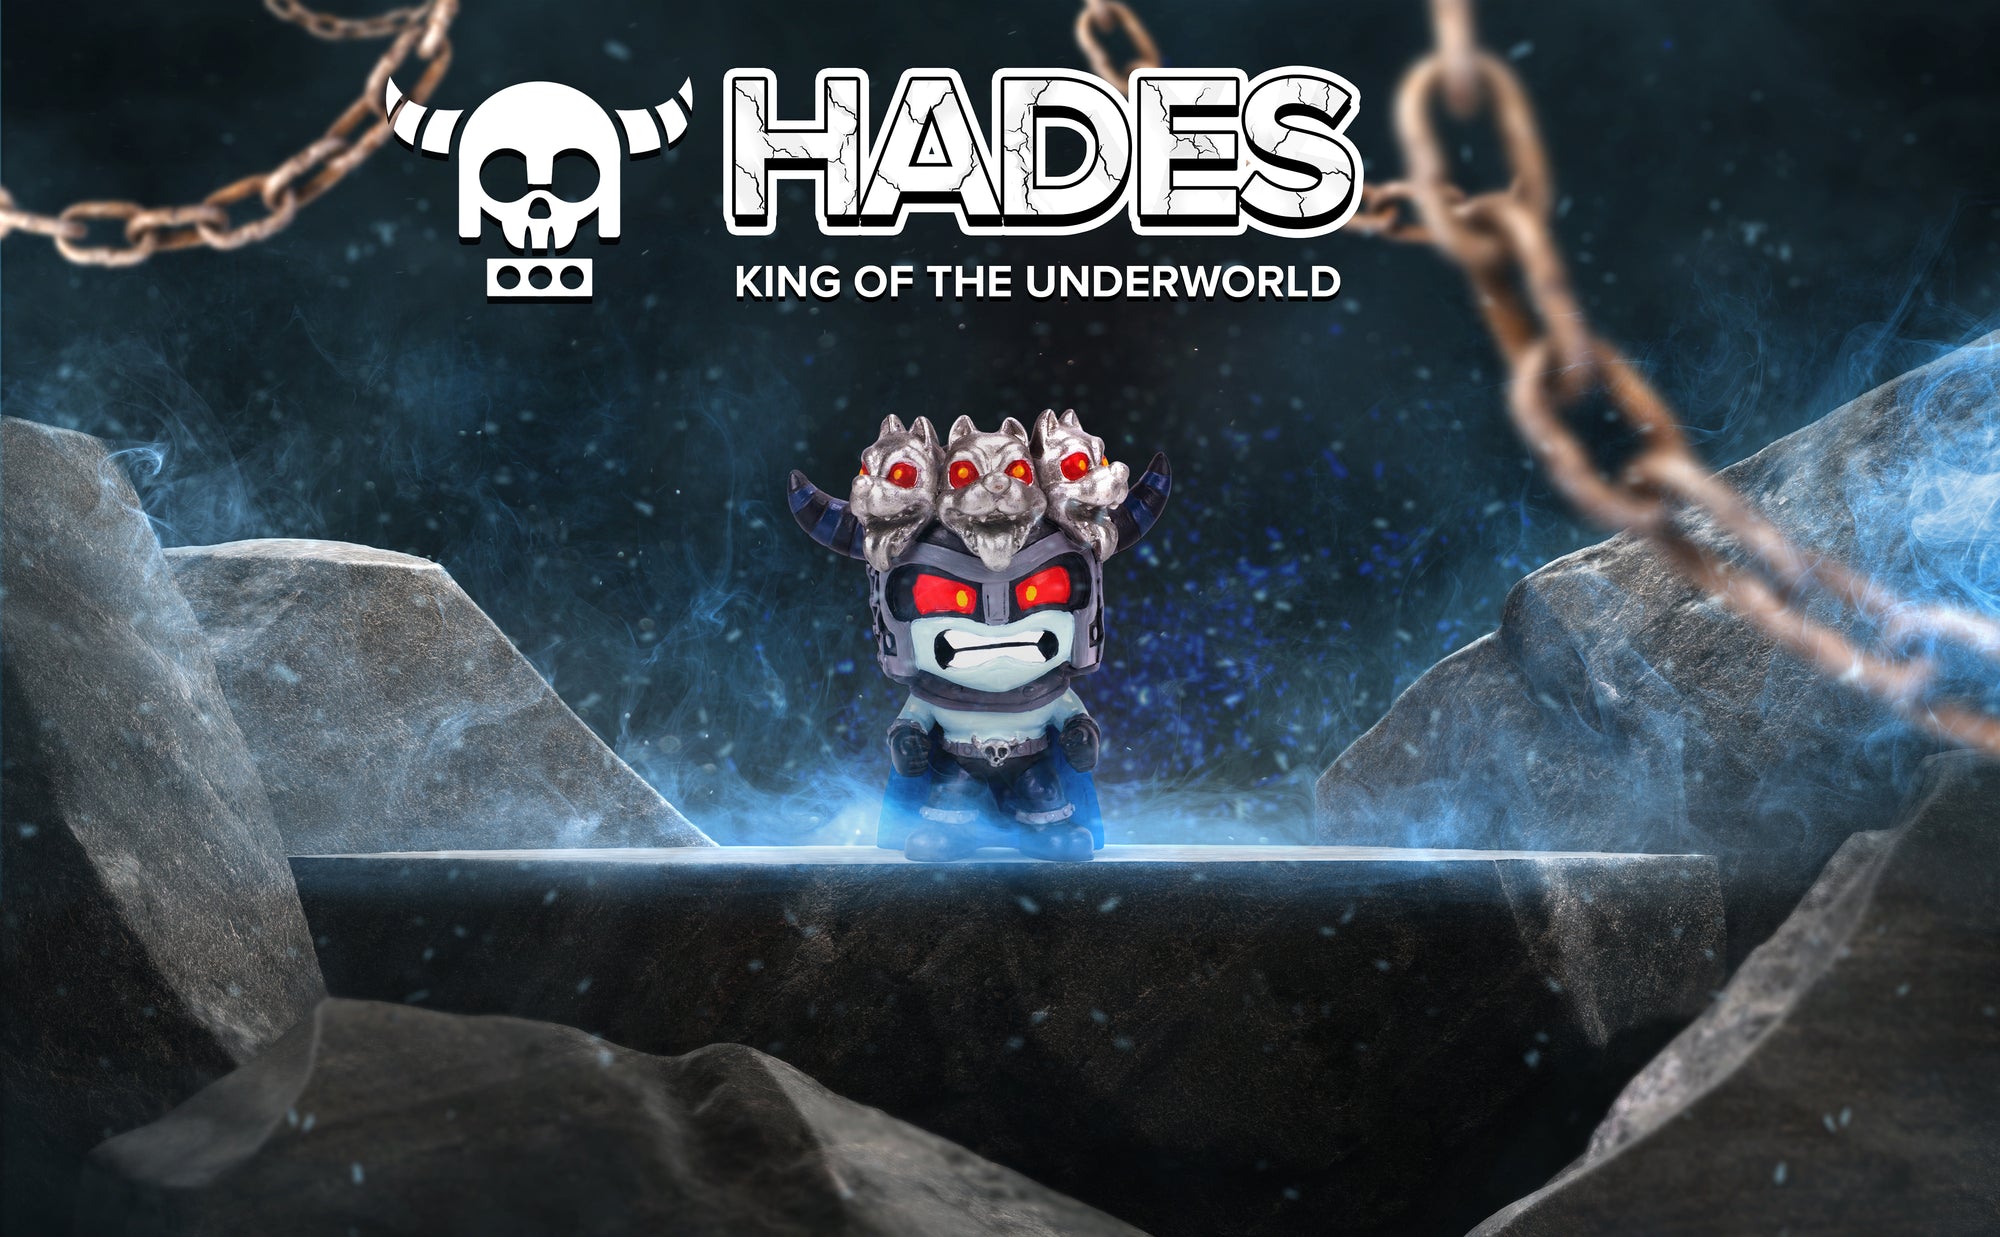 Hades Smashcraft collectible in realistic, dark, rocky Underworld with chains. Text "Hades, King of the Underworld" and Hades' skull horned helmet logo